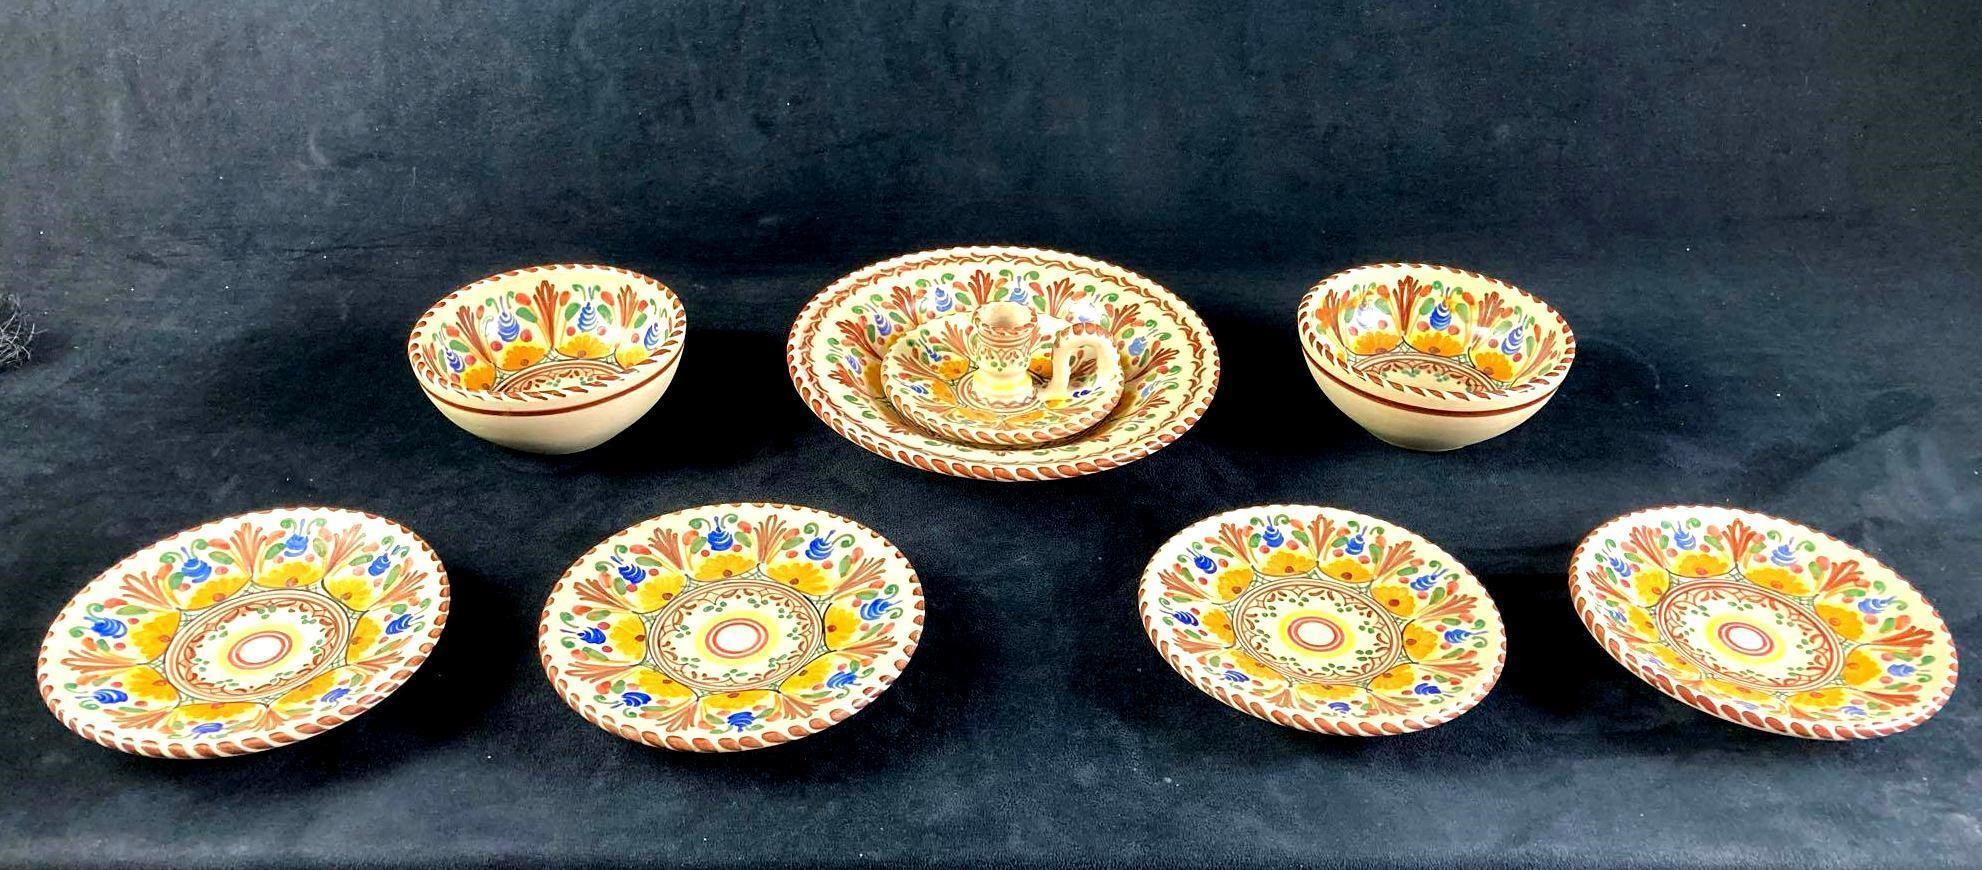 Set of Puente Pottery Plates and Bowls